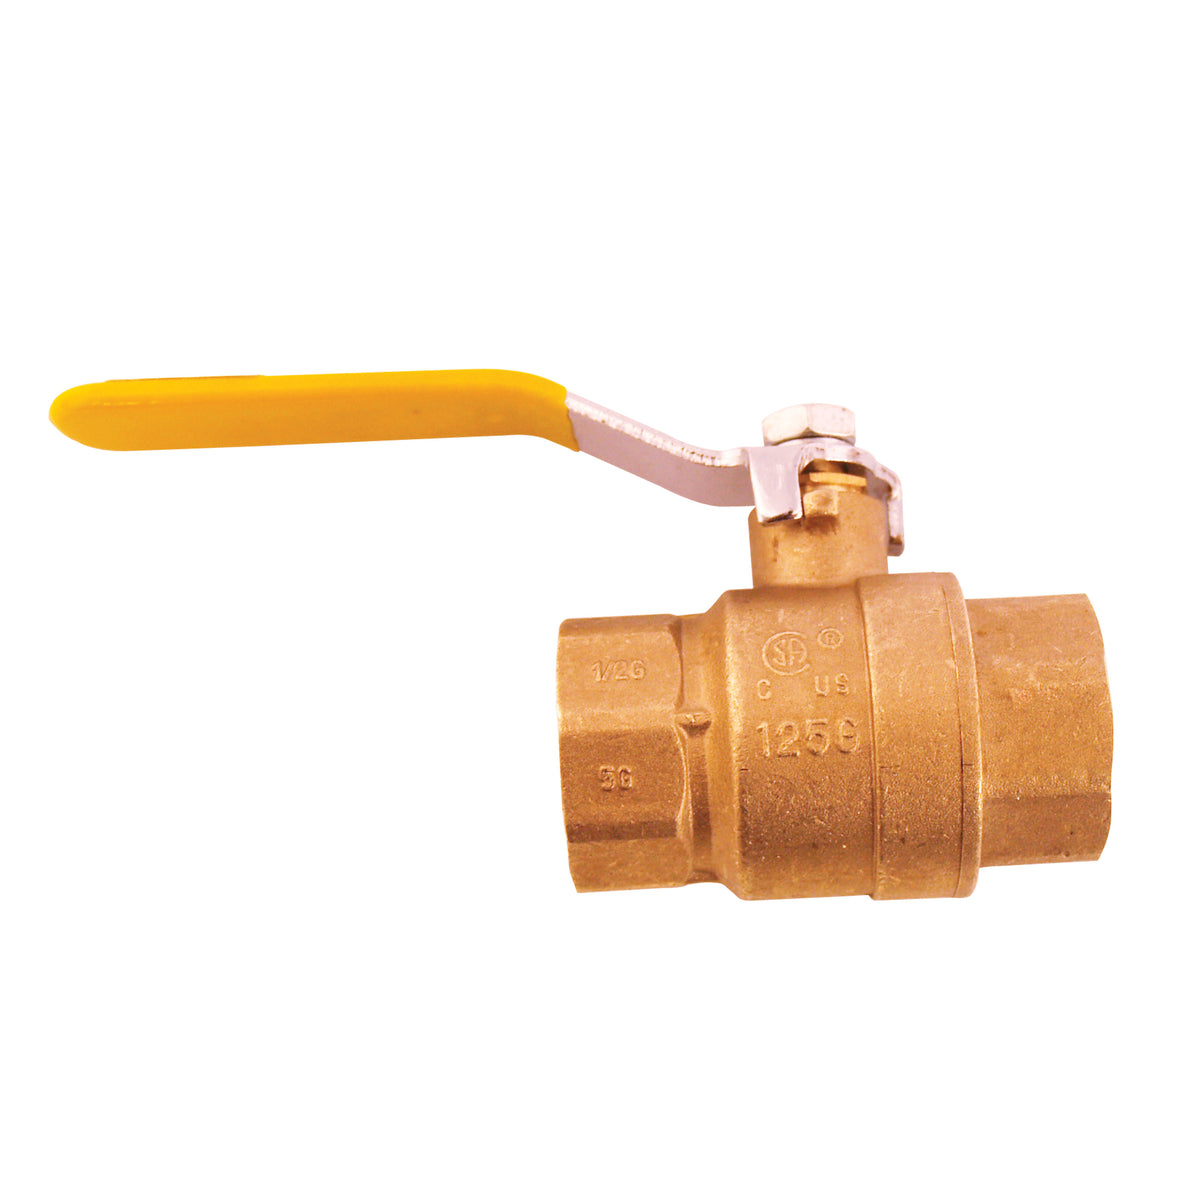 Webstone 41702W Lead-Free Full Port Forged Brass Ball Valve with Chrome Plated Lever Handle - 1/2" FNPT